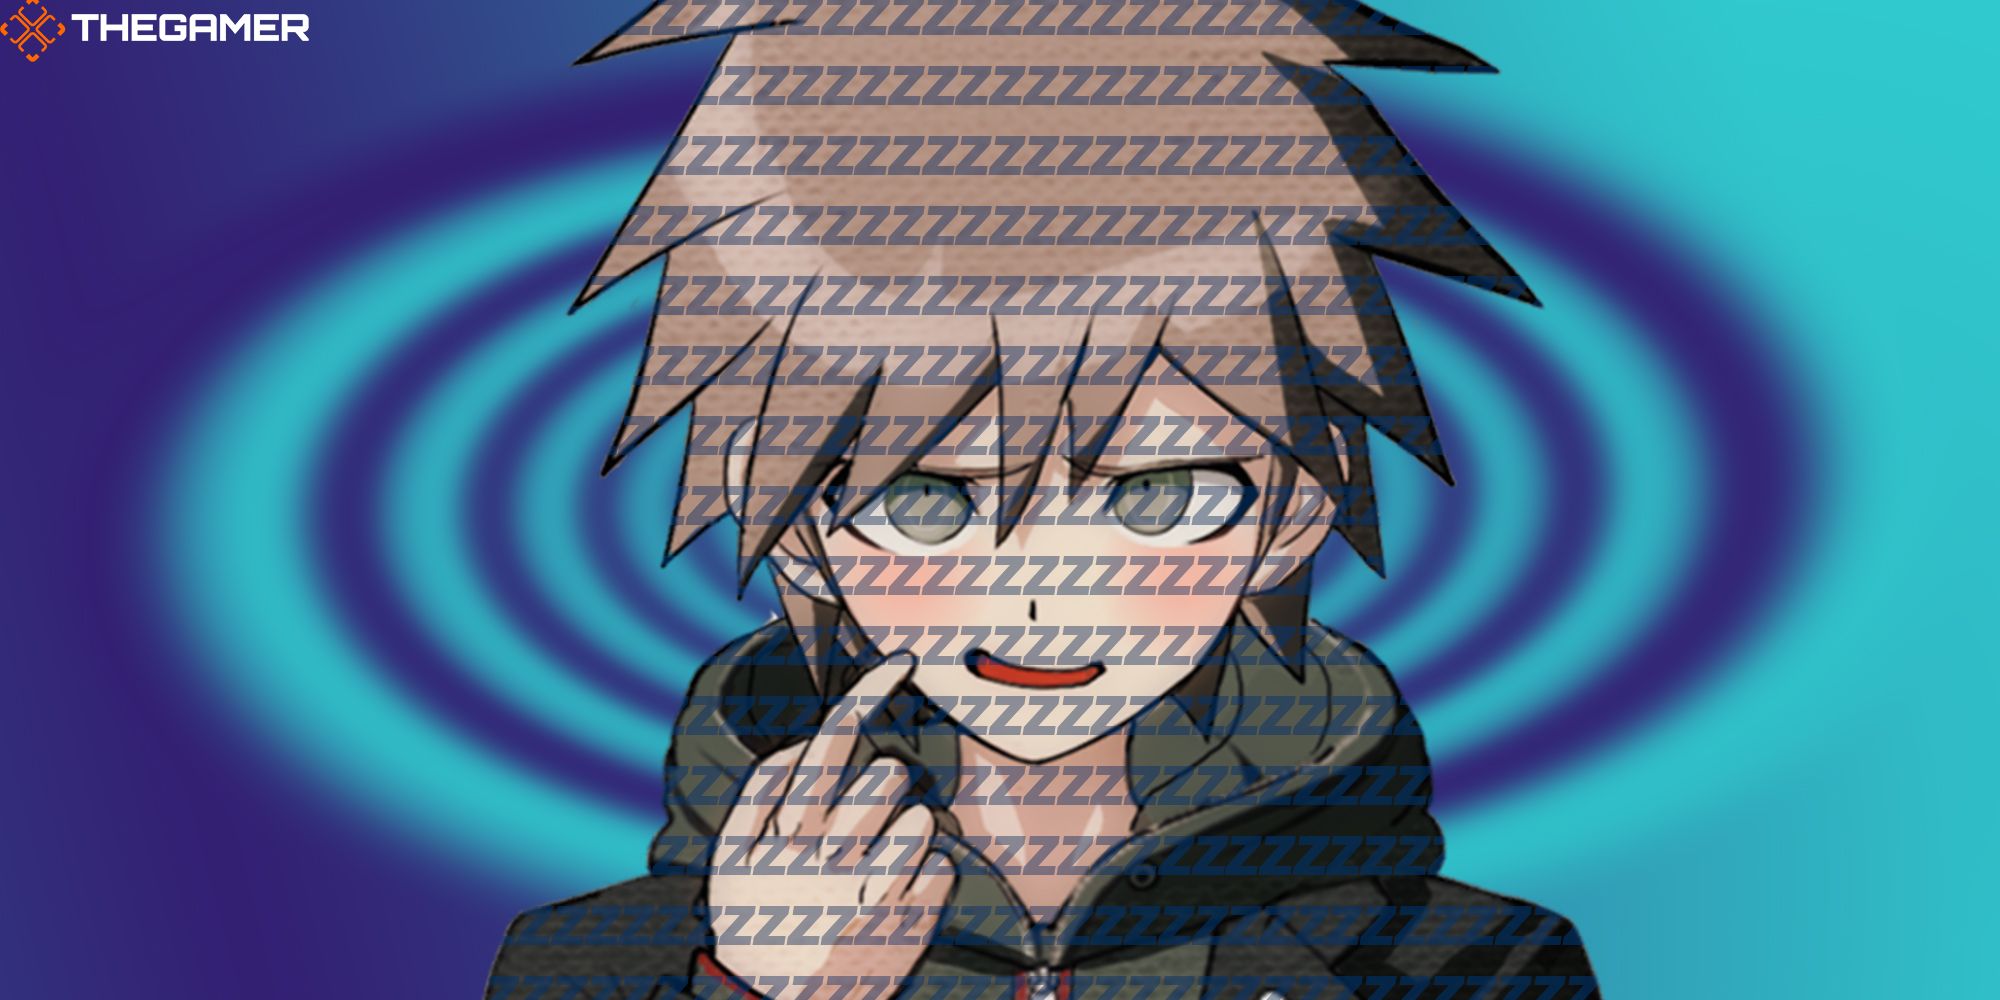 A flustered Makoto Naegi (Danganronpa), covered in Zs, stands in front of a hypnotic swirling blue background.